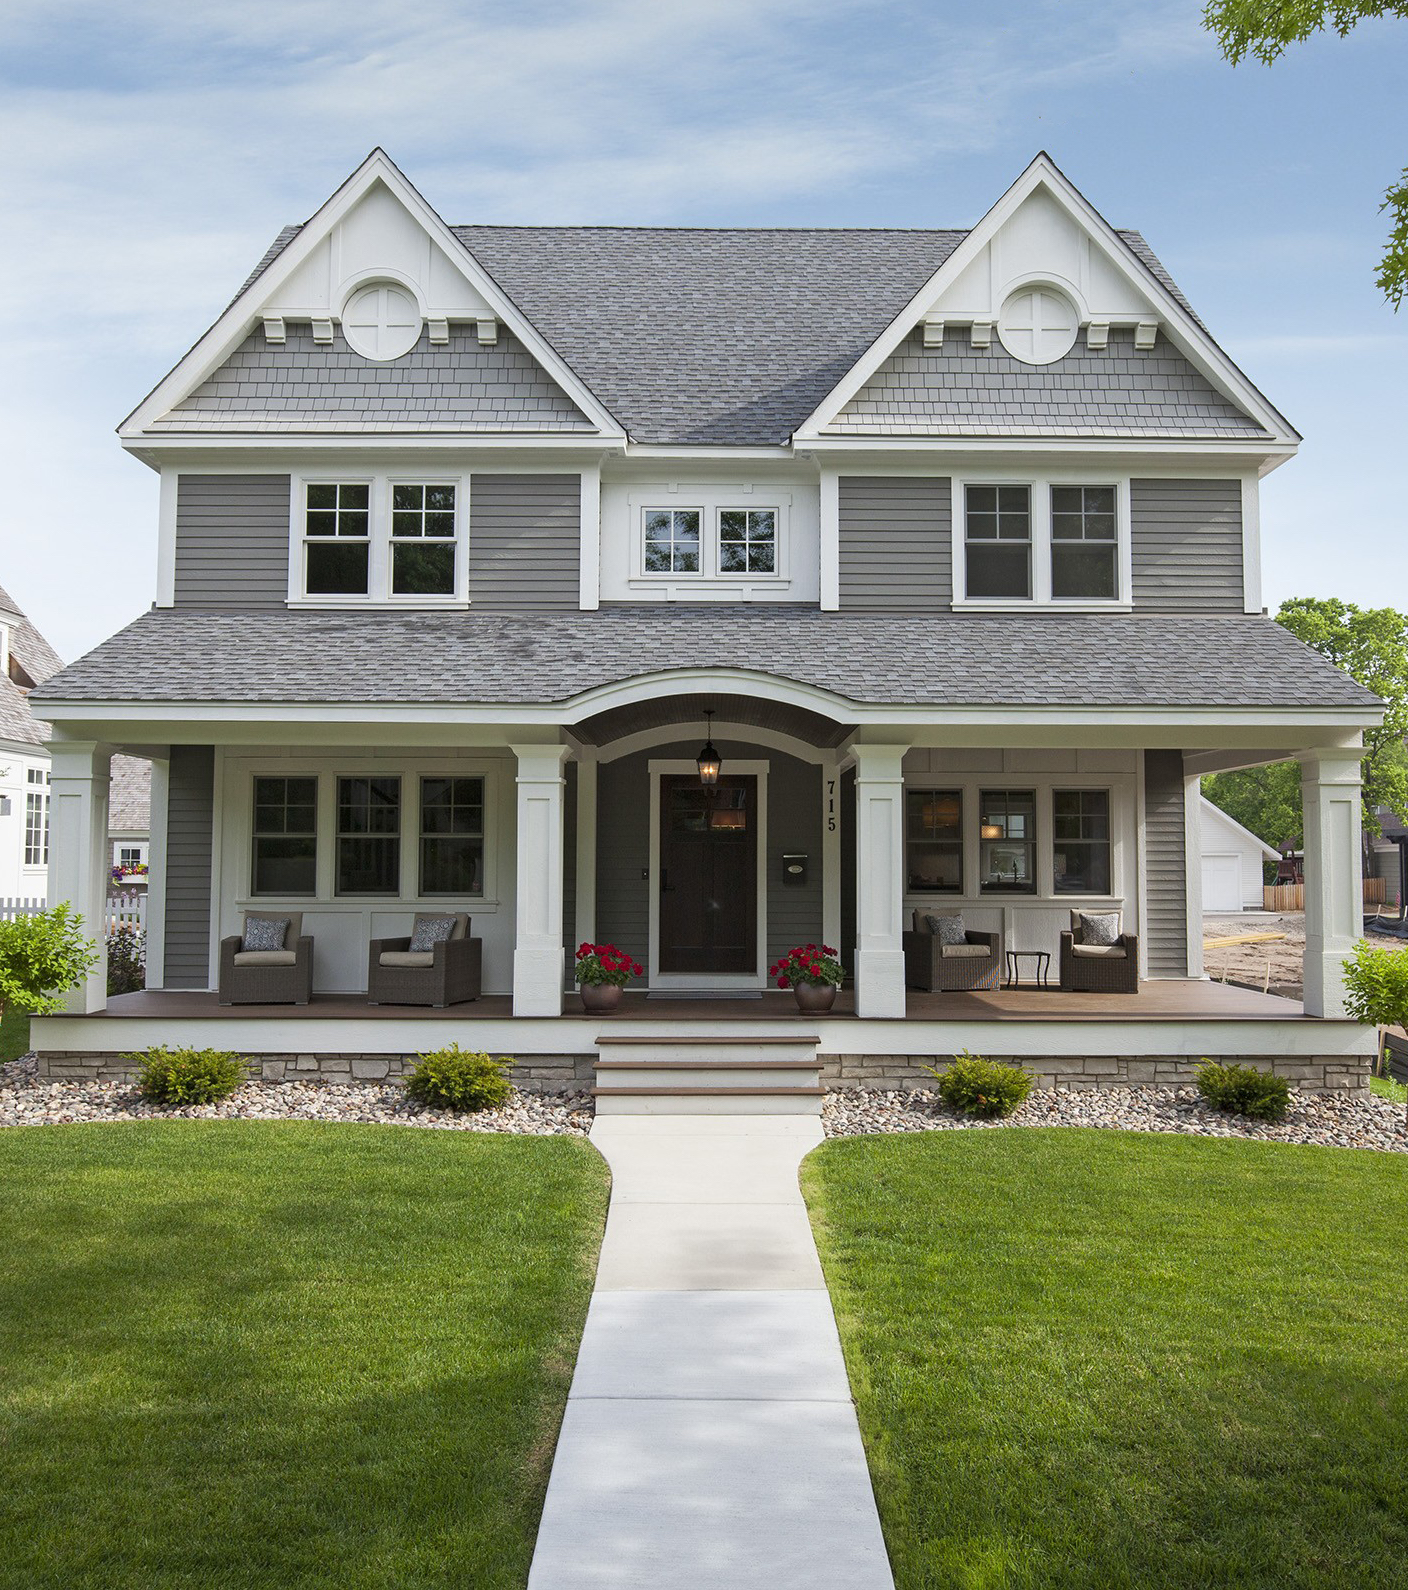 Enhance your home's curb appeal and value with a stylish white front porch and gray siding.